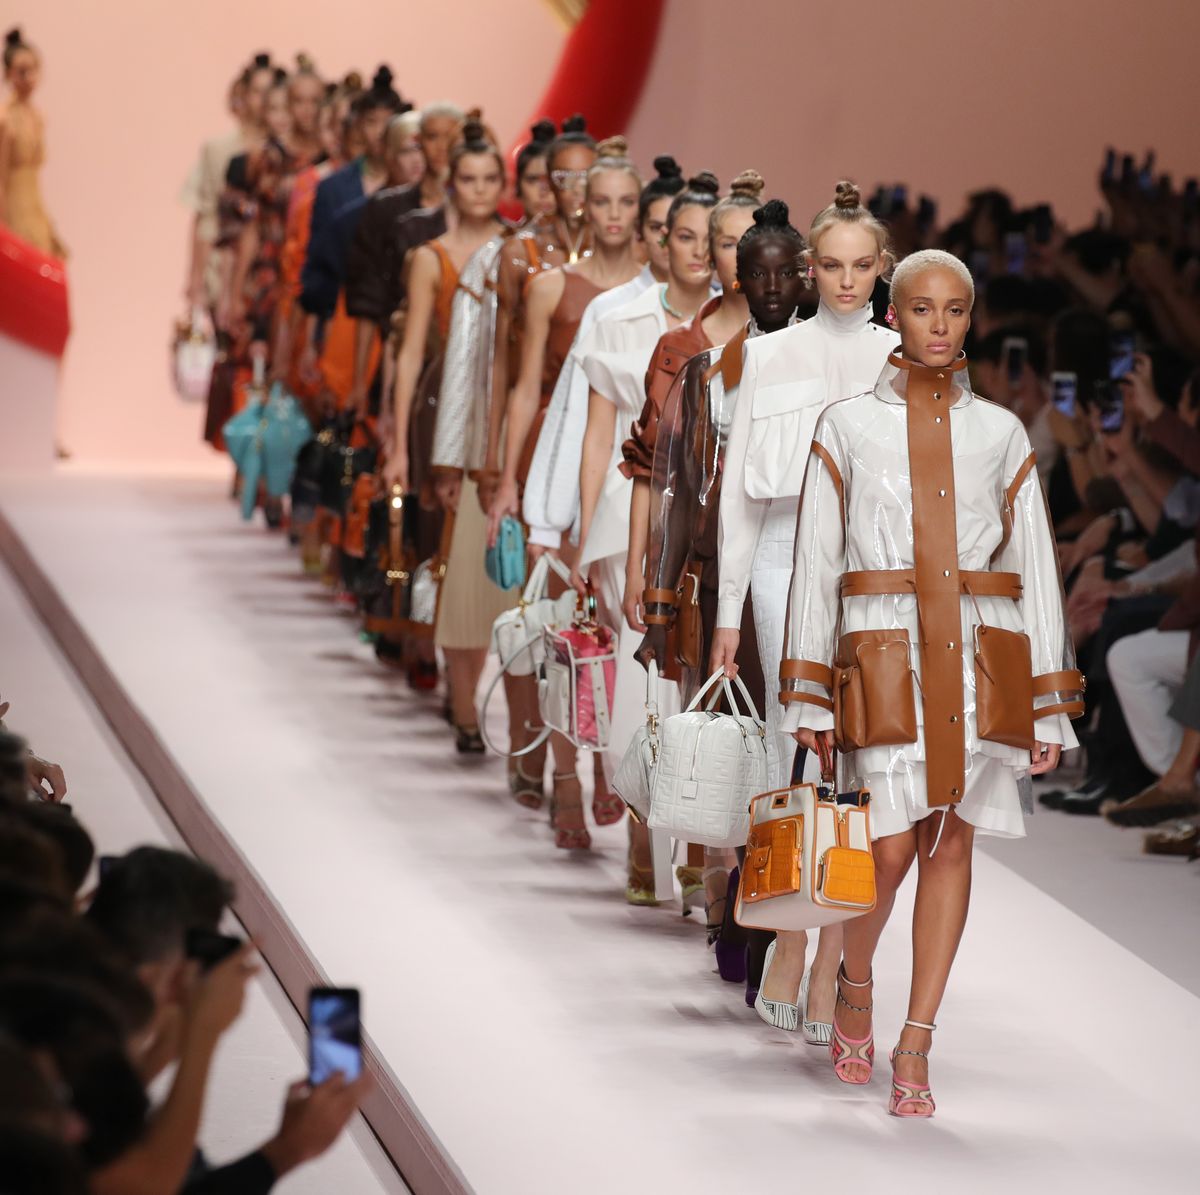 Milan Fashion Week will go ahead this September